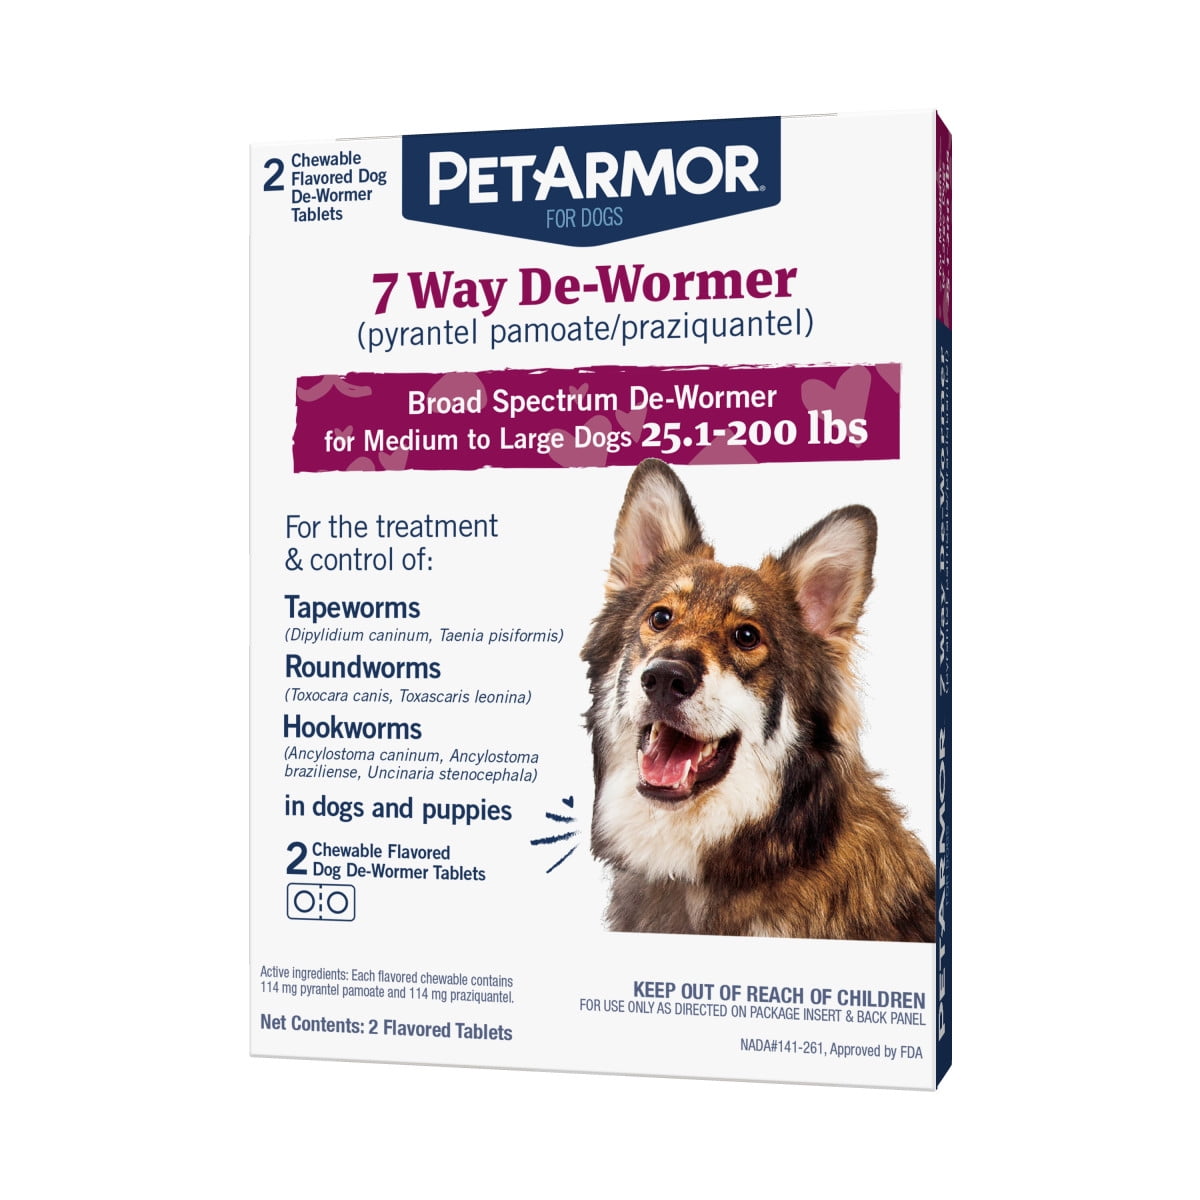 PETARMOR 7 Way De-Wormer (pyrantel pamoate and praziquantel) for Medium and Large Dogs, 25.1-200 lbs, Chewable, 2 Chewable Tablets